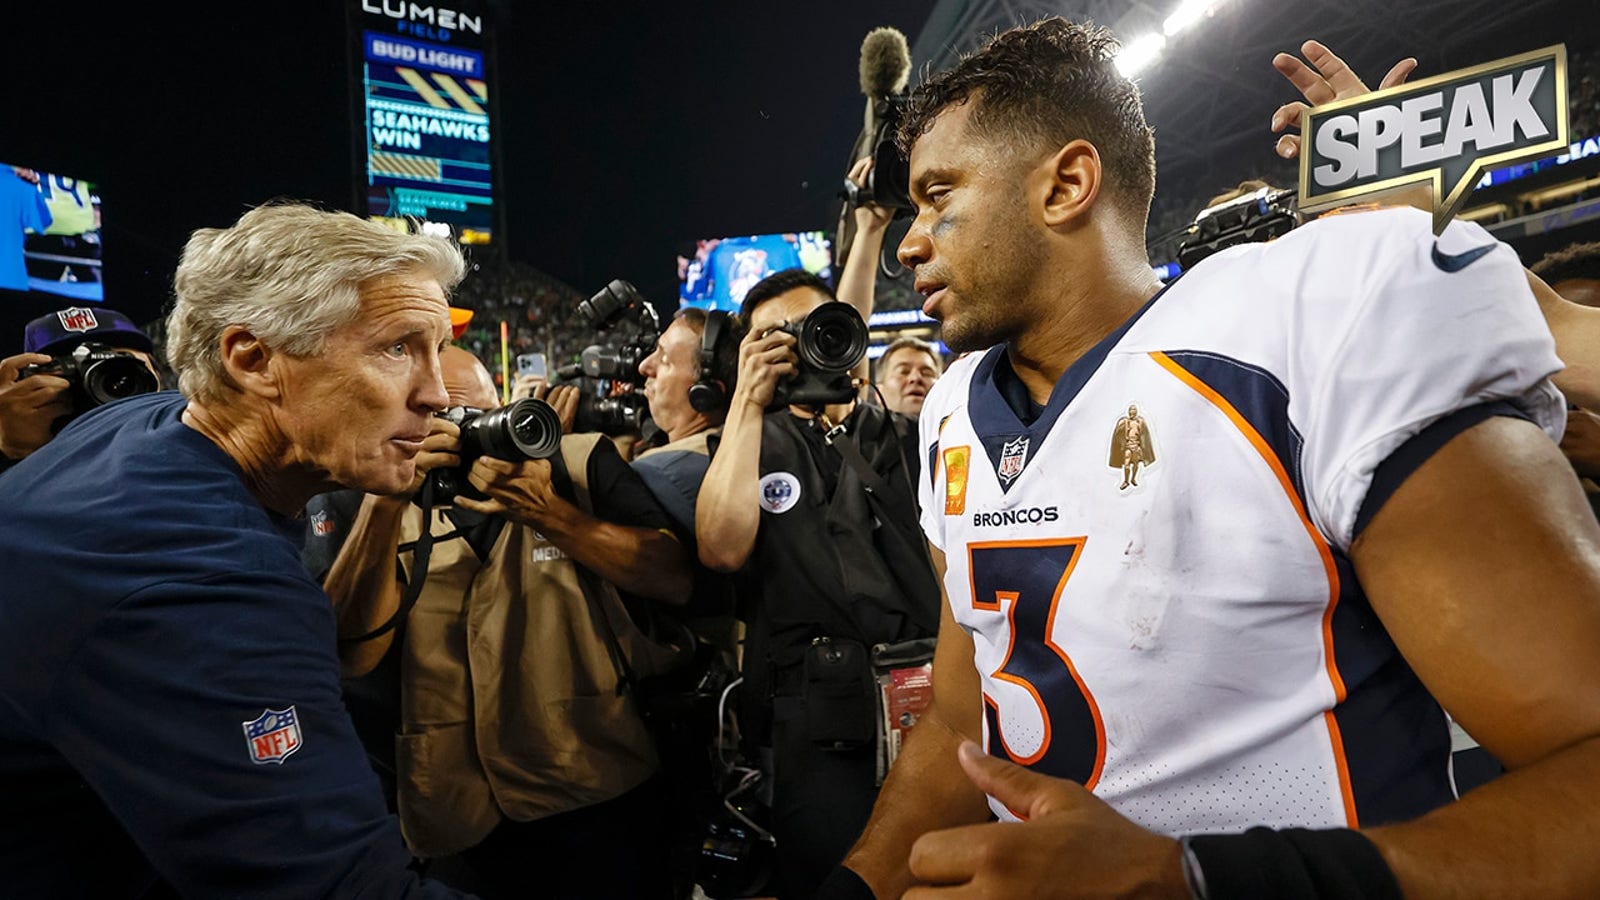 Russell Wilson wanted Pete Carroll fired in Seattle before being traded, per reports 